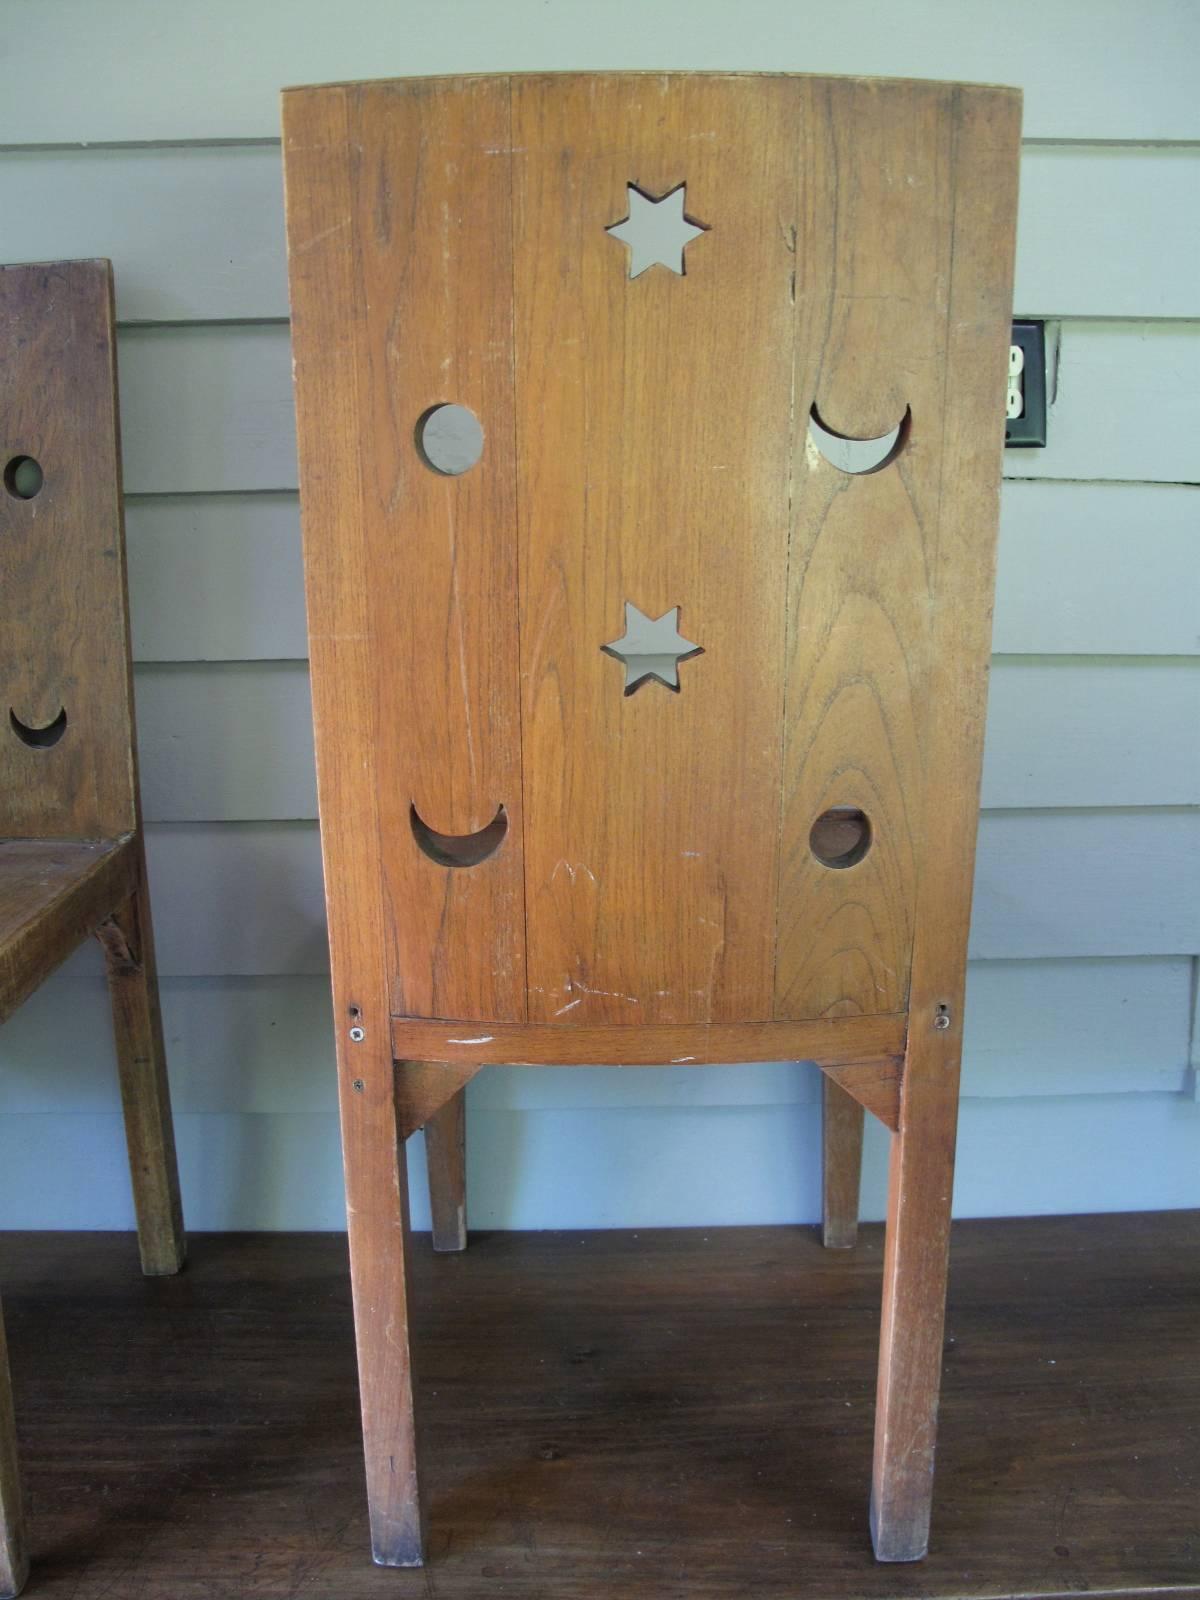 Set of four handmade oak chairs, each having sun, moon, and stars shapes cut from back panels. Seats have a shallow recess intended to hold a cushion as shown. No apparent signature or makers mark.